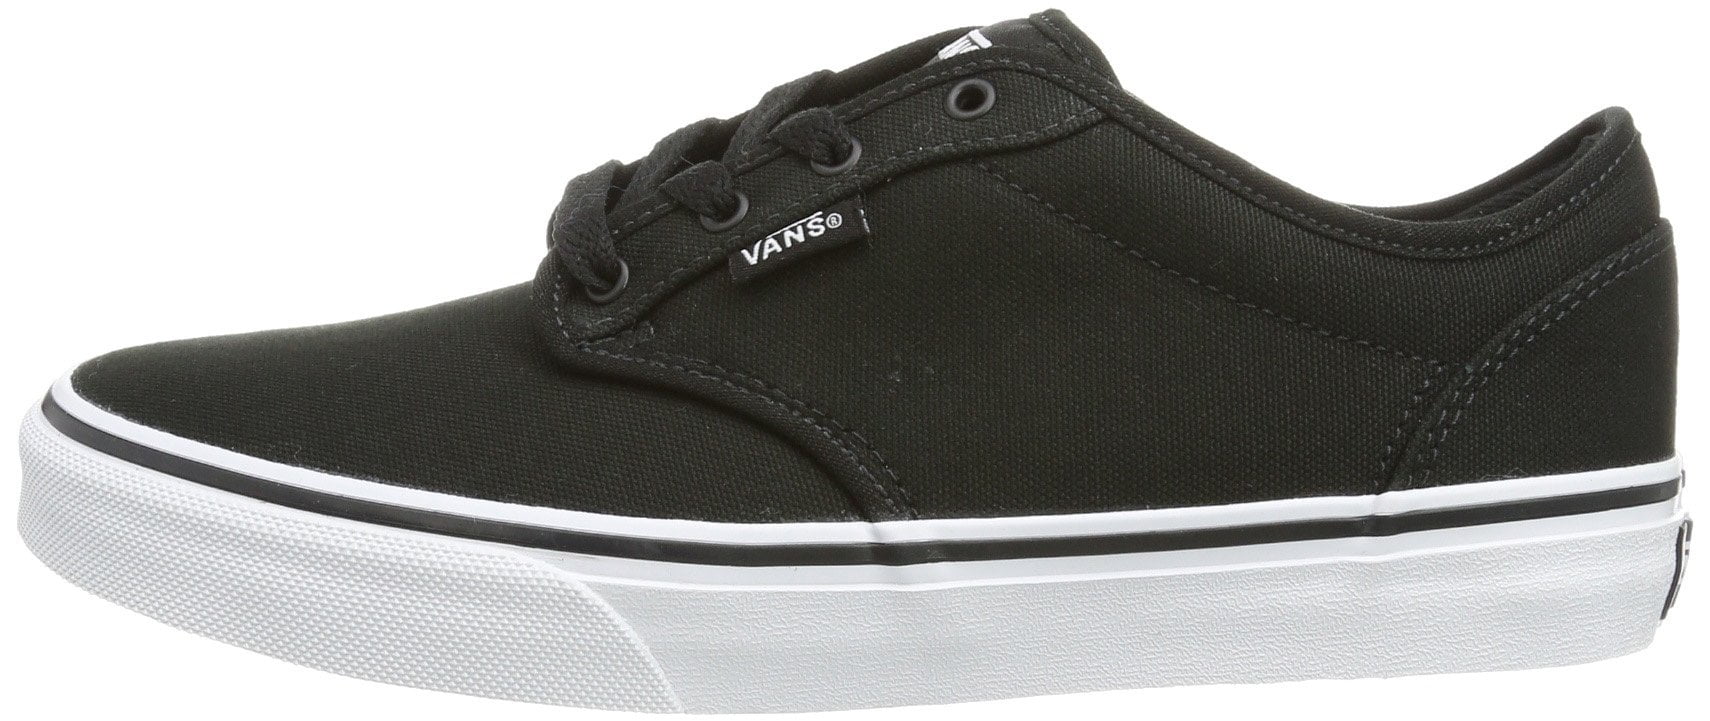 vans yt atwood canvas